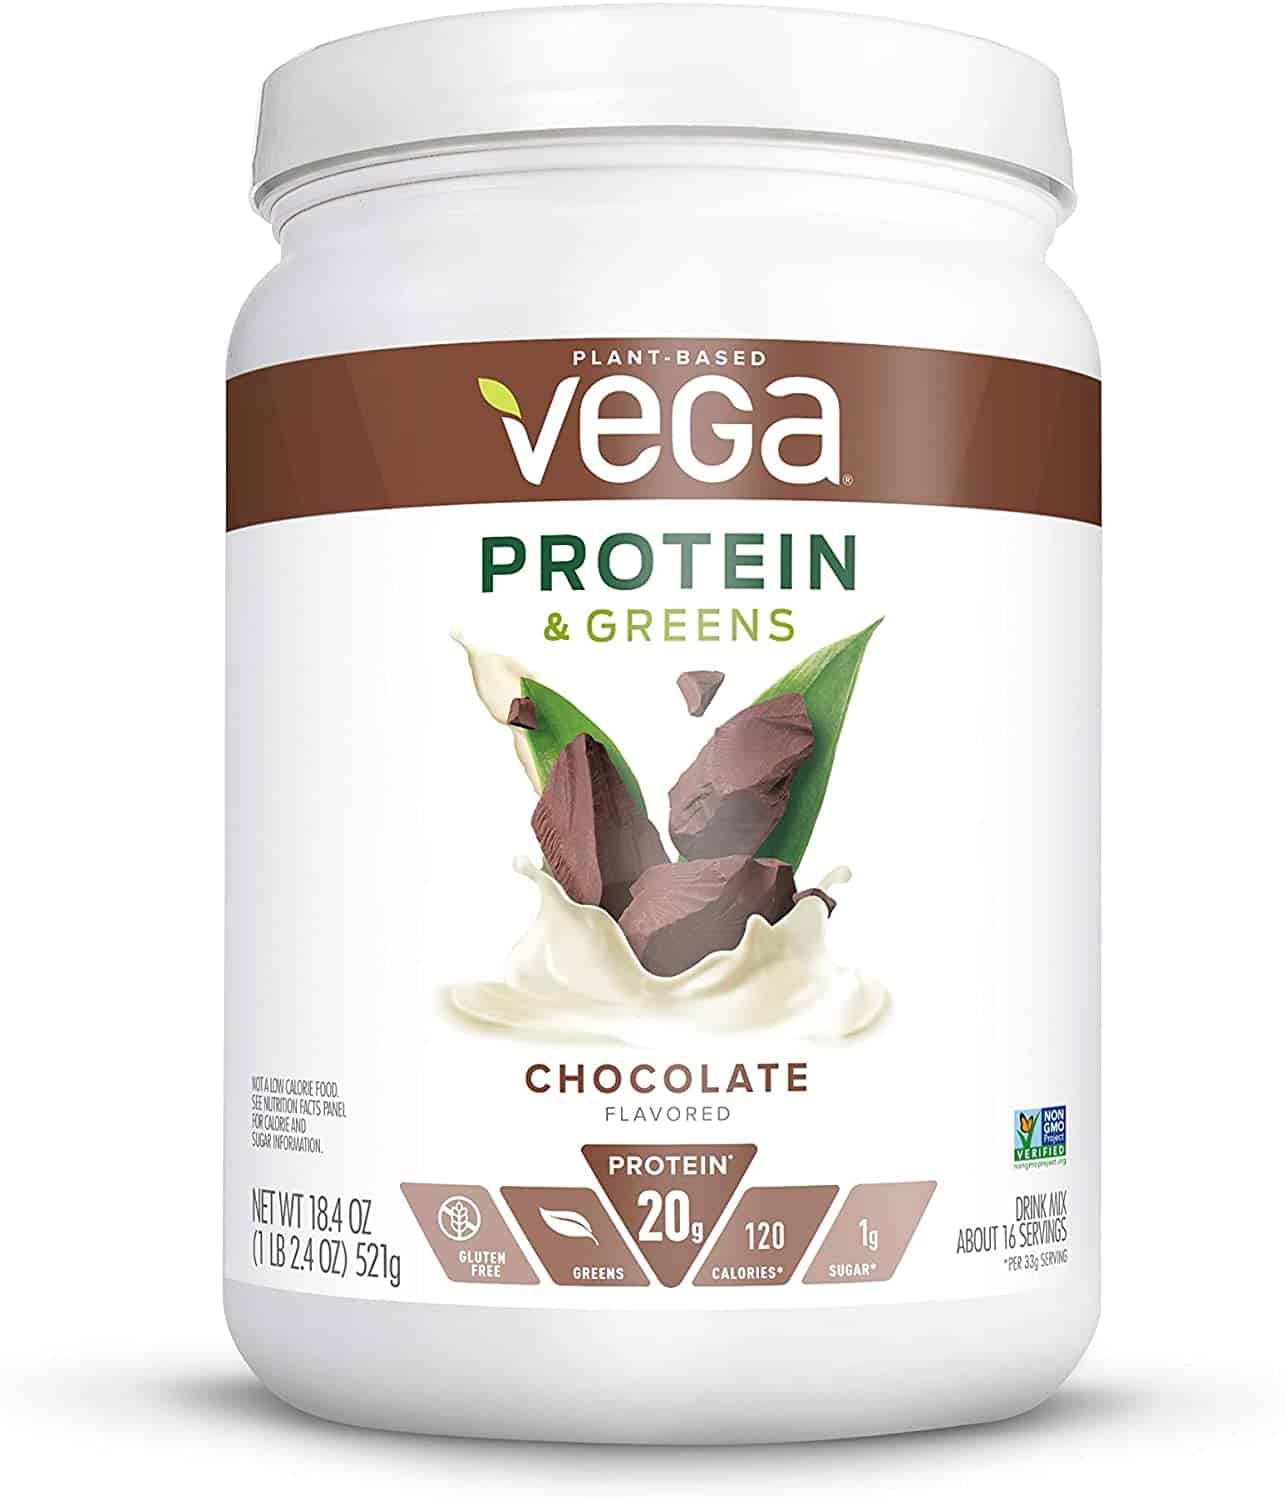 Best Vegan Protein Powder Review: my review of the best tasting vegan protein powder to the worst—chocolate edition! Plant-Based. #Vegan #ProteinPowder #PlantBased #VeganProtein | Review + Recipe at topqa.info